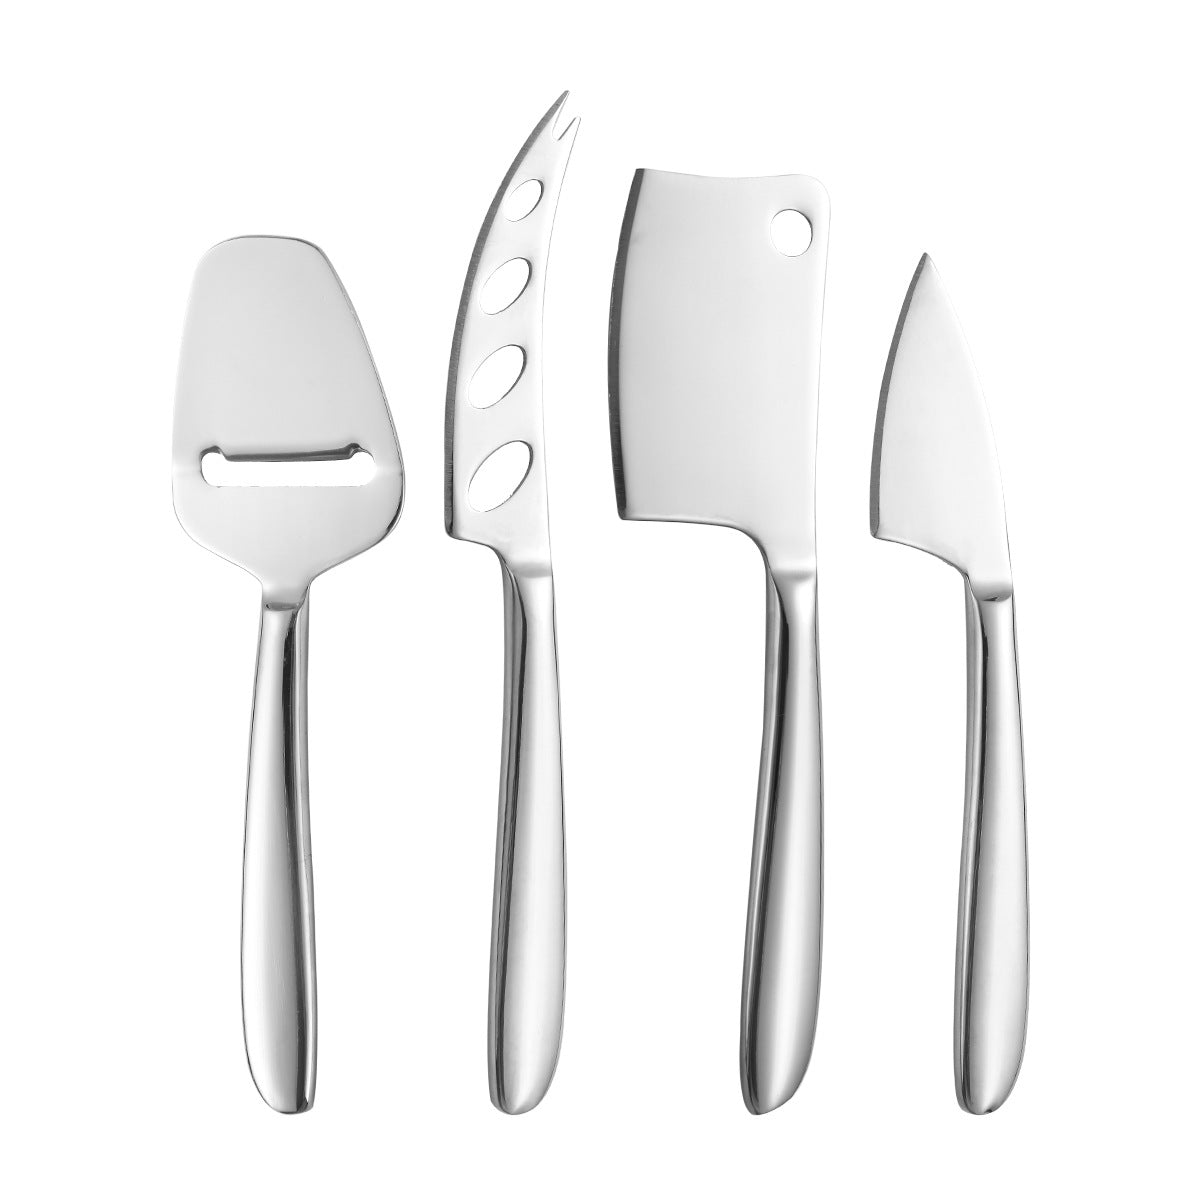 Stainless Steel Cheese Knife 4-piece Multifunctional